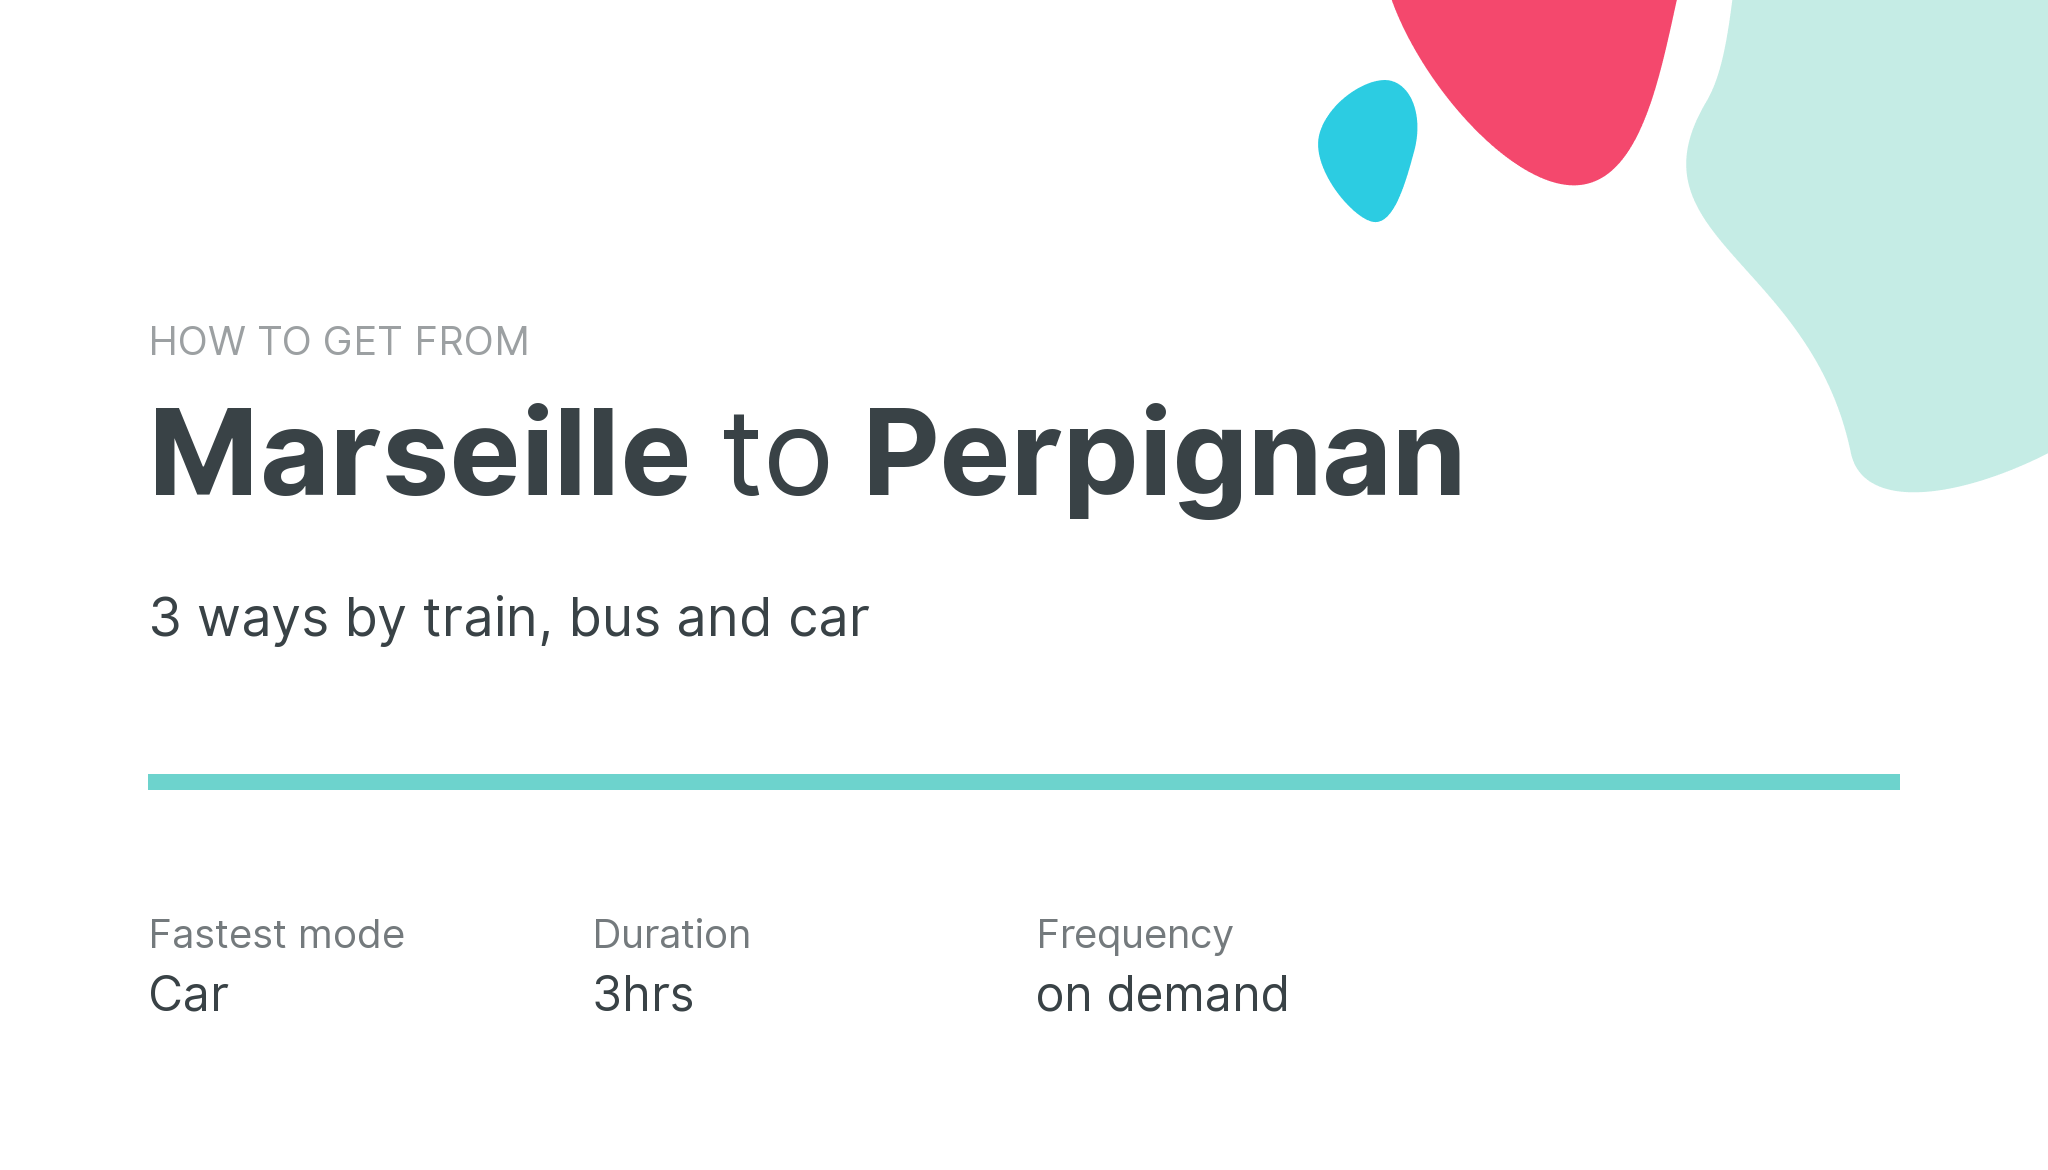 How do I get from Marseille to Perpignan